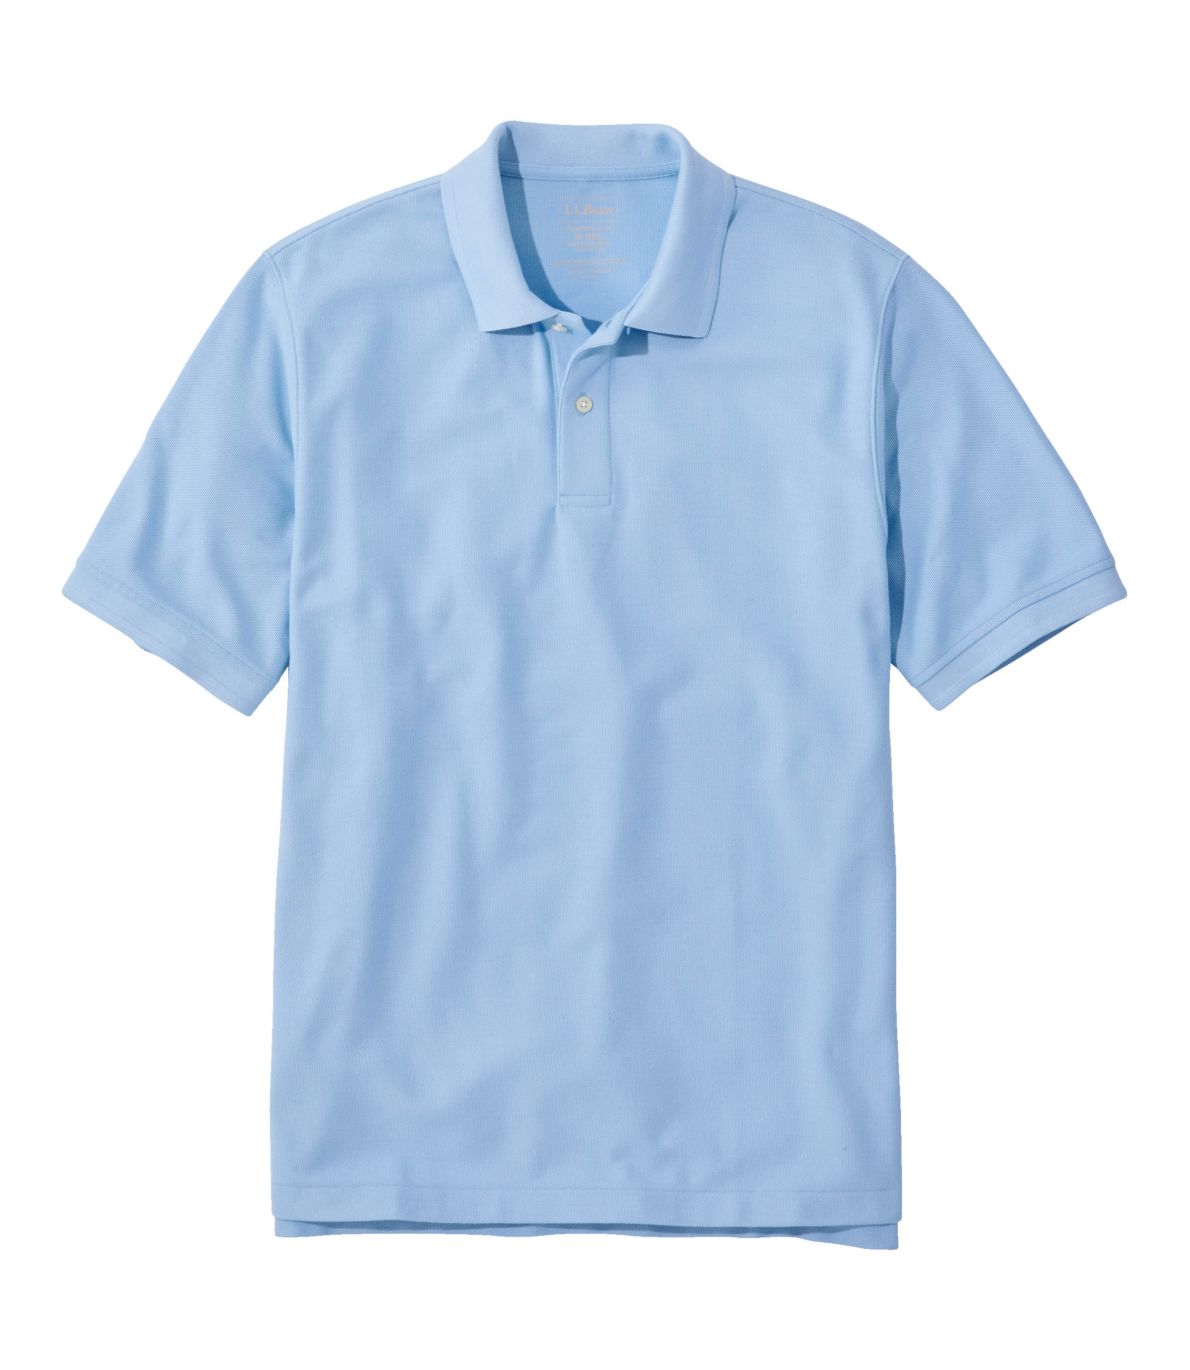 Men's Premium Double L® Polo Banded, Short-Sleeve Without Pocket